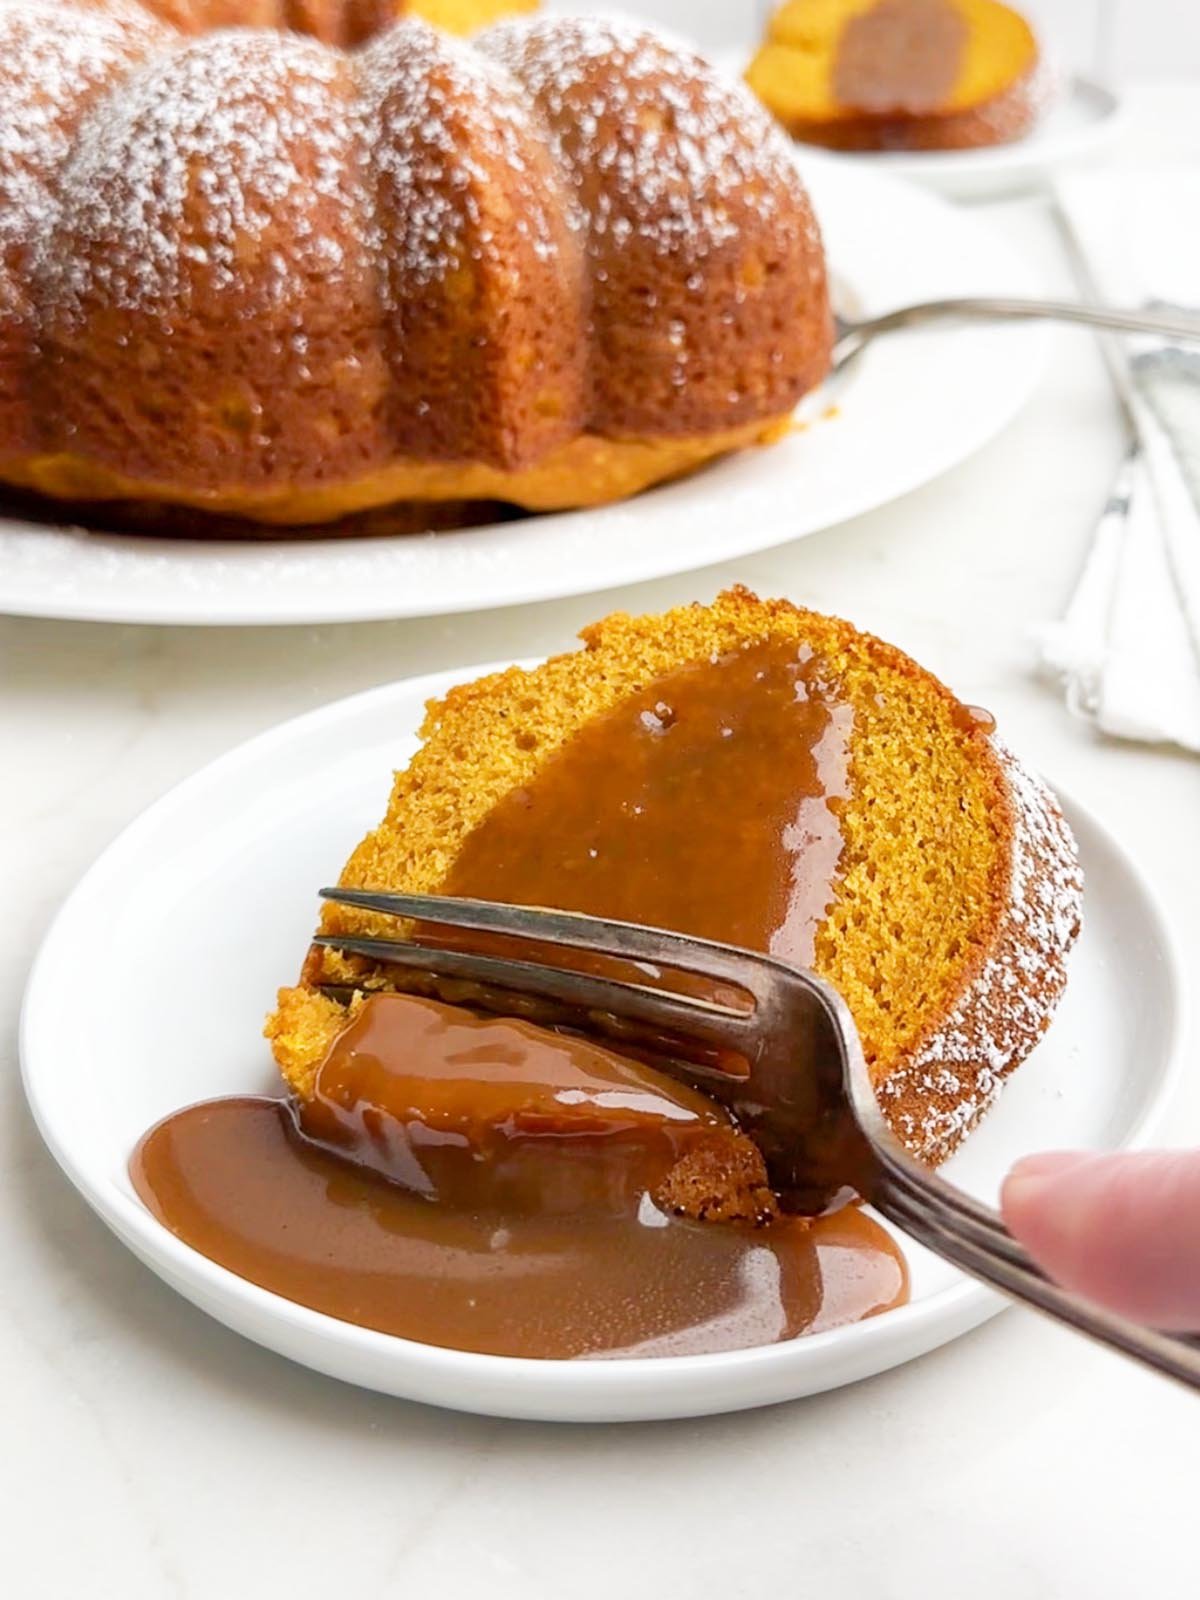 fork cutting into a piece of pumpkin cake with yellow cake mix topped with caramel sauce.